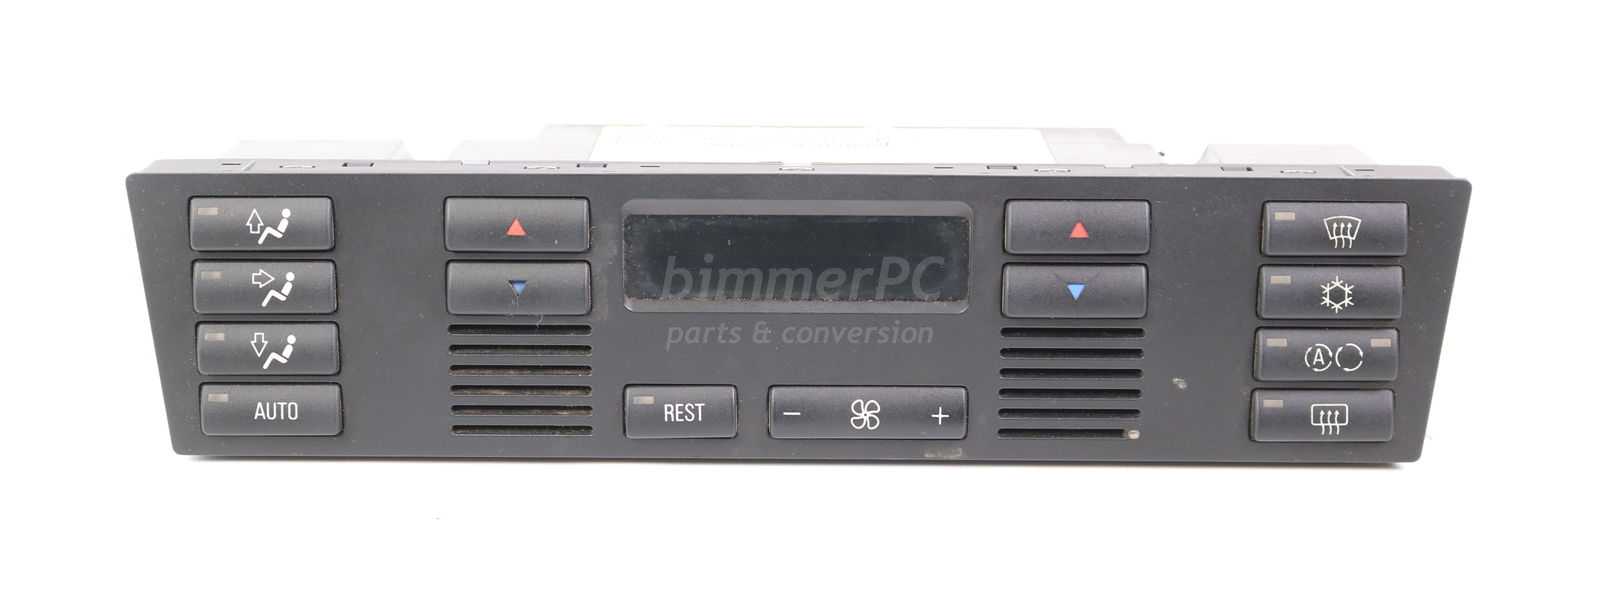 Picture of BMW 64118375453 IHKA Heater AC Climate Control Interface Buttons Module E39 Early for sale